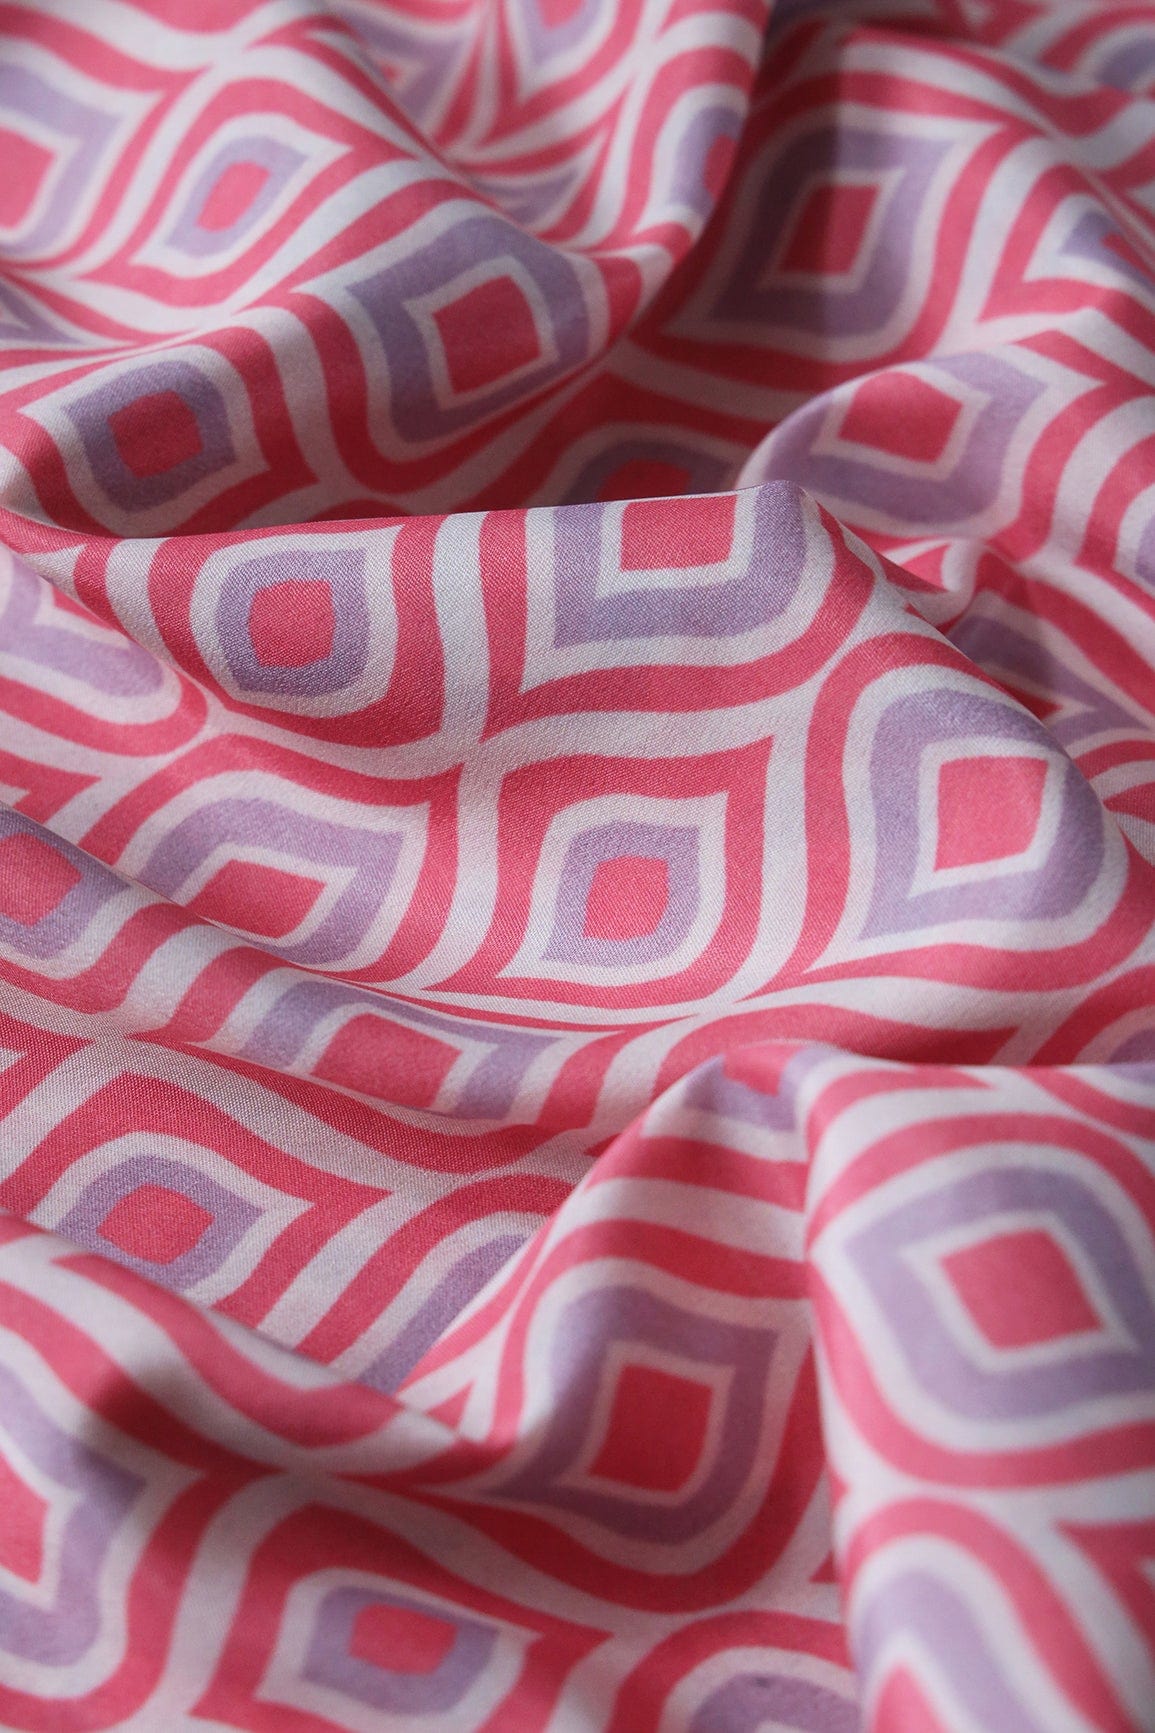 doeraa Prints Pink And Light Purple Oggie Pattern Digital Print On Off White French Crepe Fabric